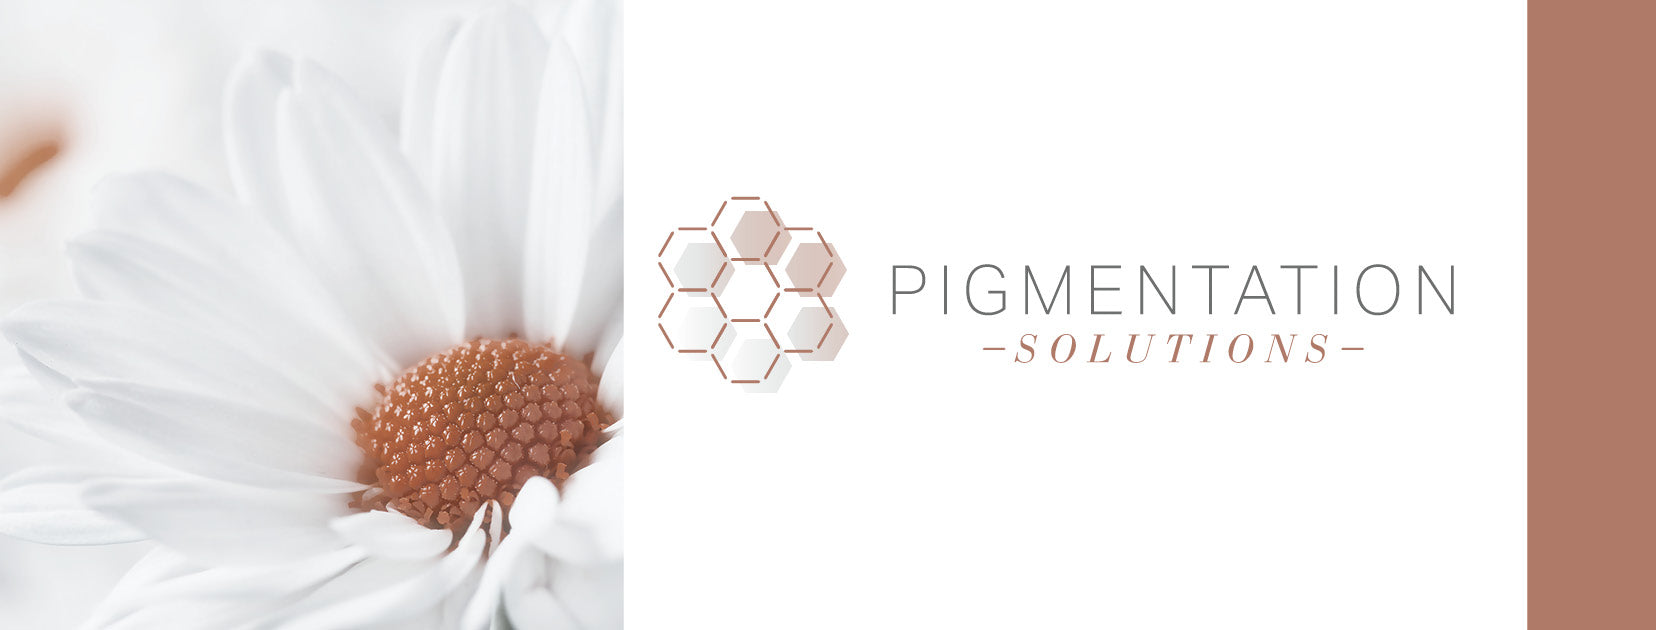 Pigmentation Solutions - Cleansers & Scrubs